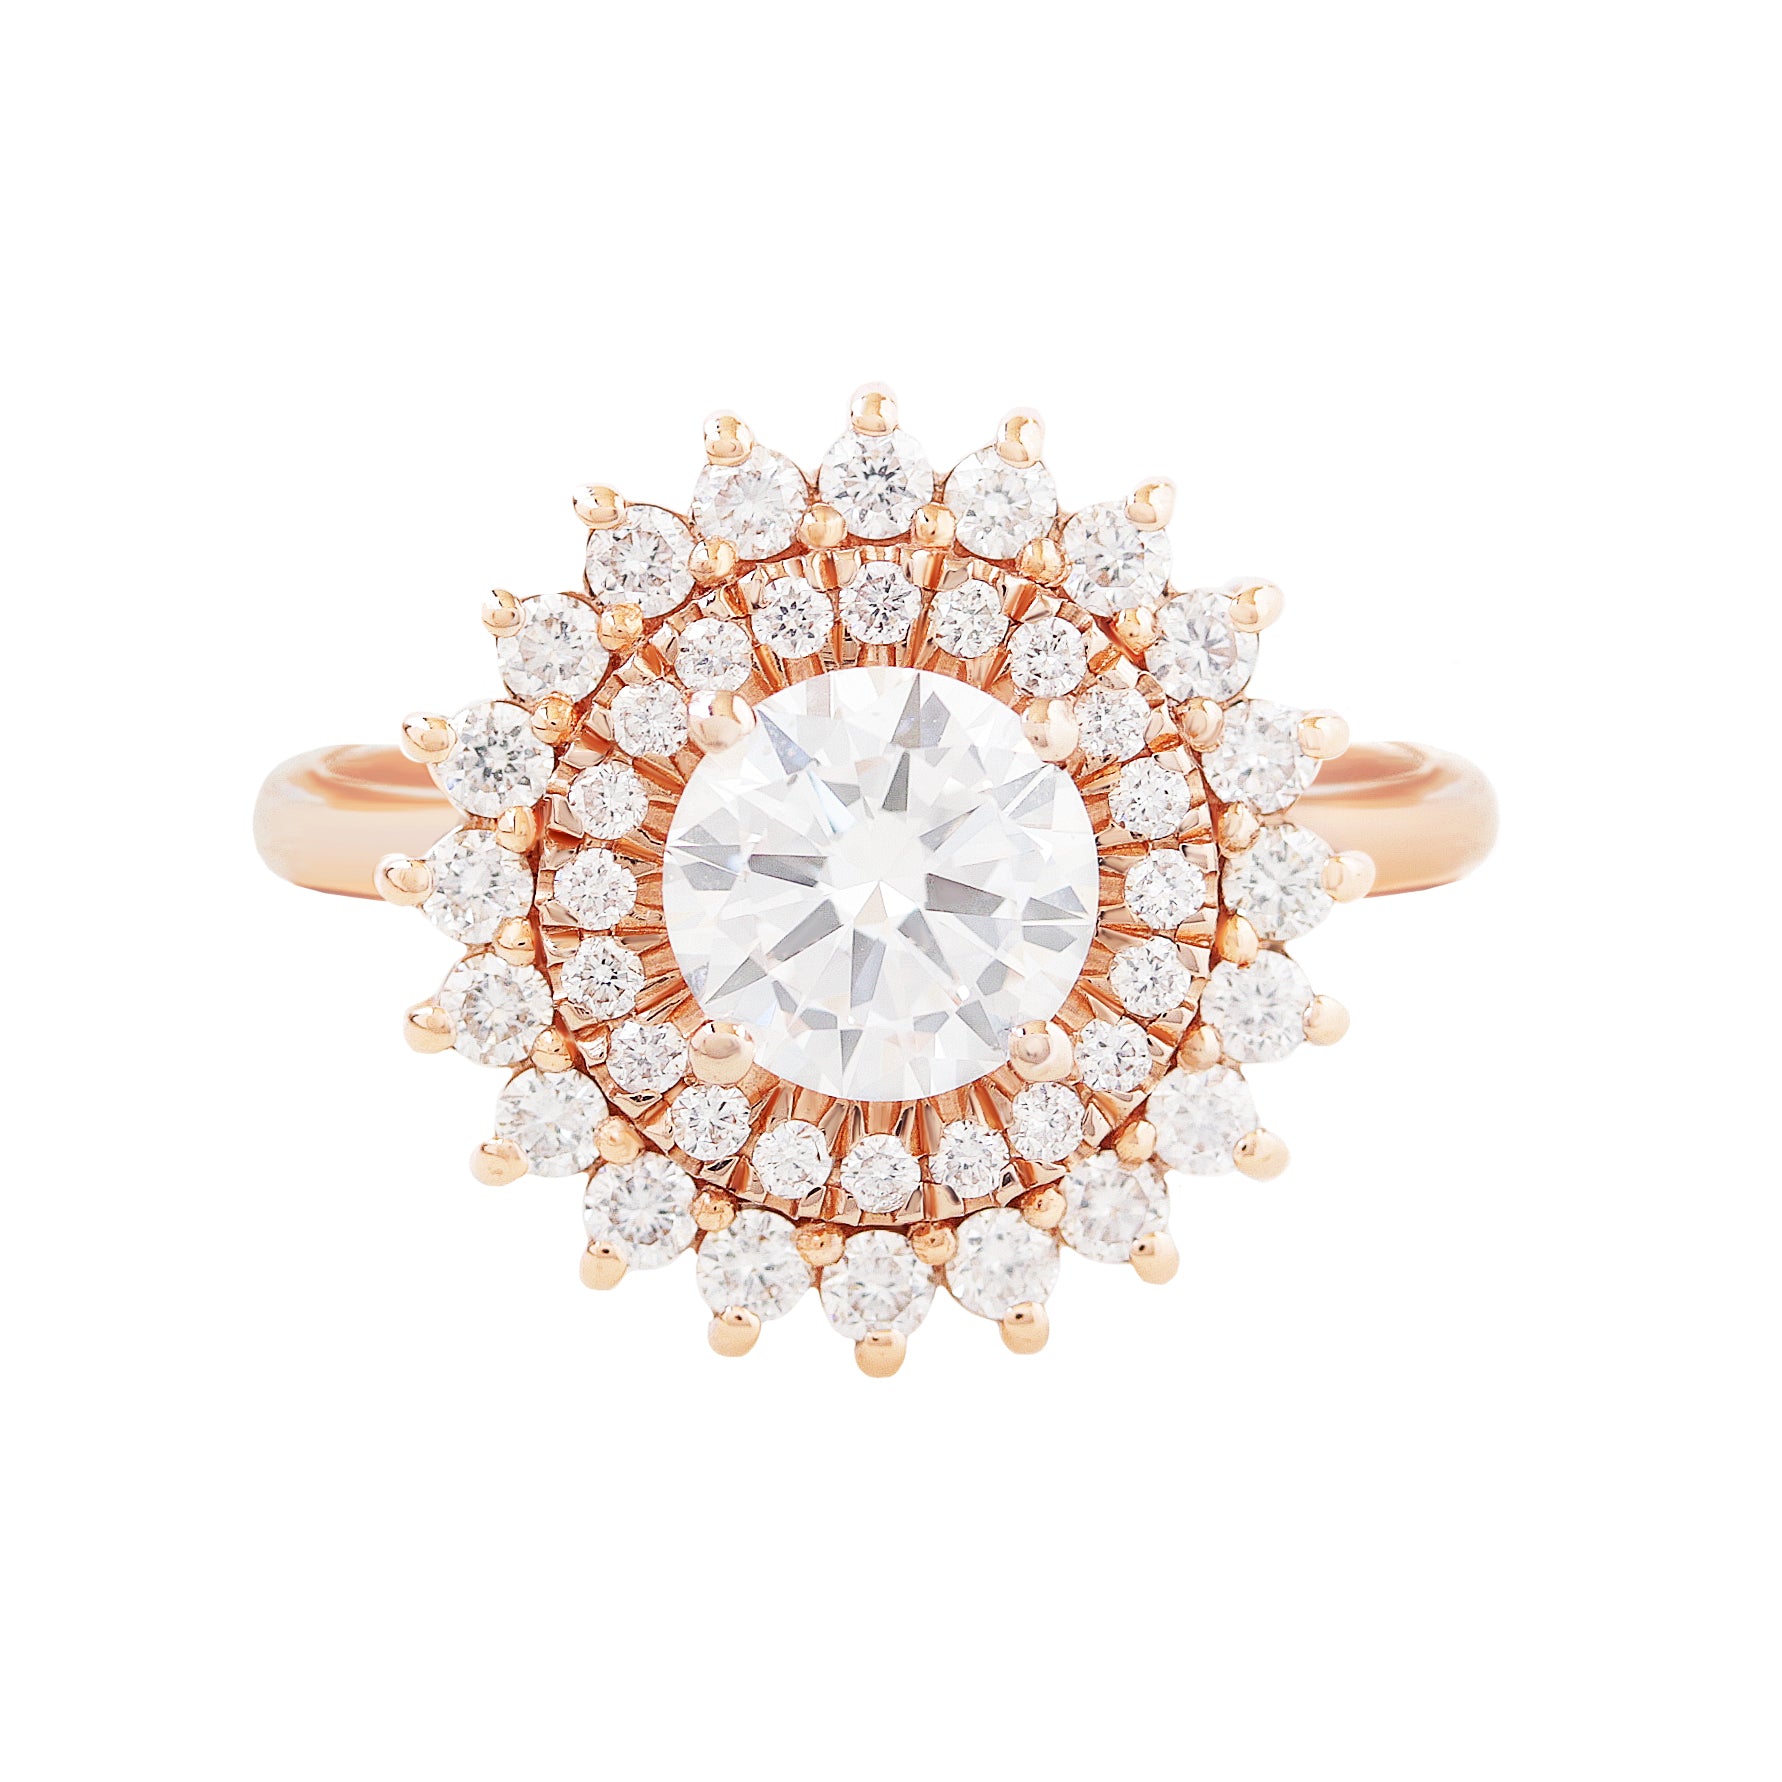 Round Diamond Double Halo Ballerina Engagement Ring - Veronica - 14K Rose Gold, Sizes 5-8, READY TO SHIP!